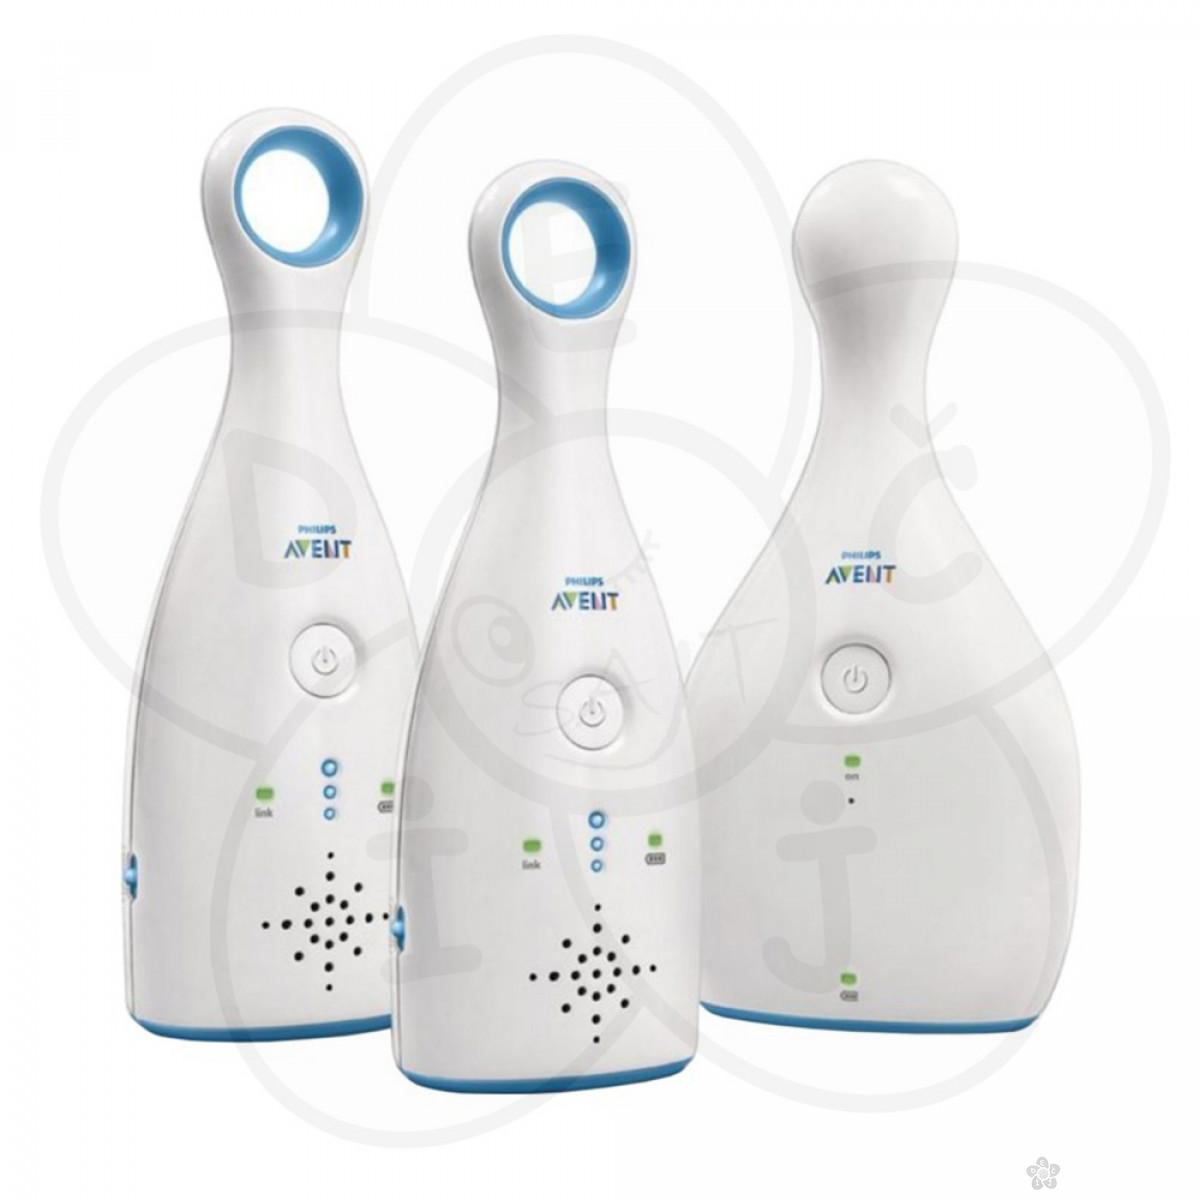 Avent baby monitor, analogni 0341 